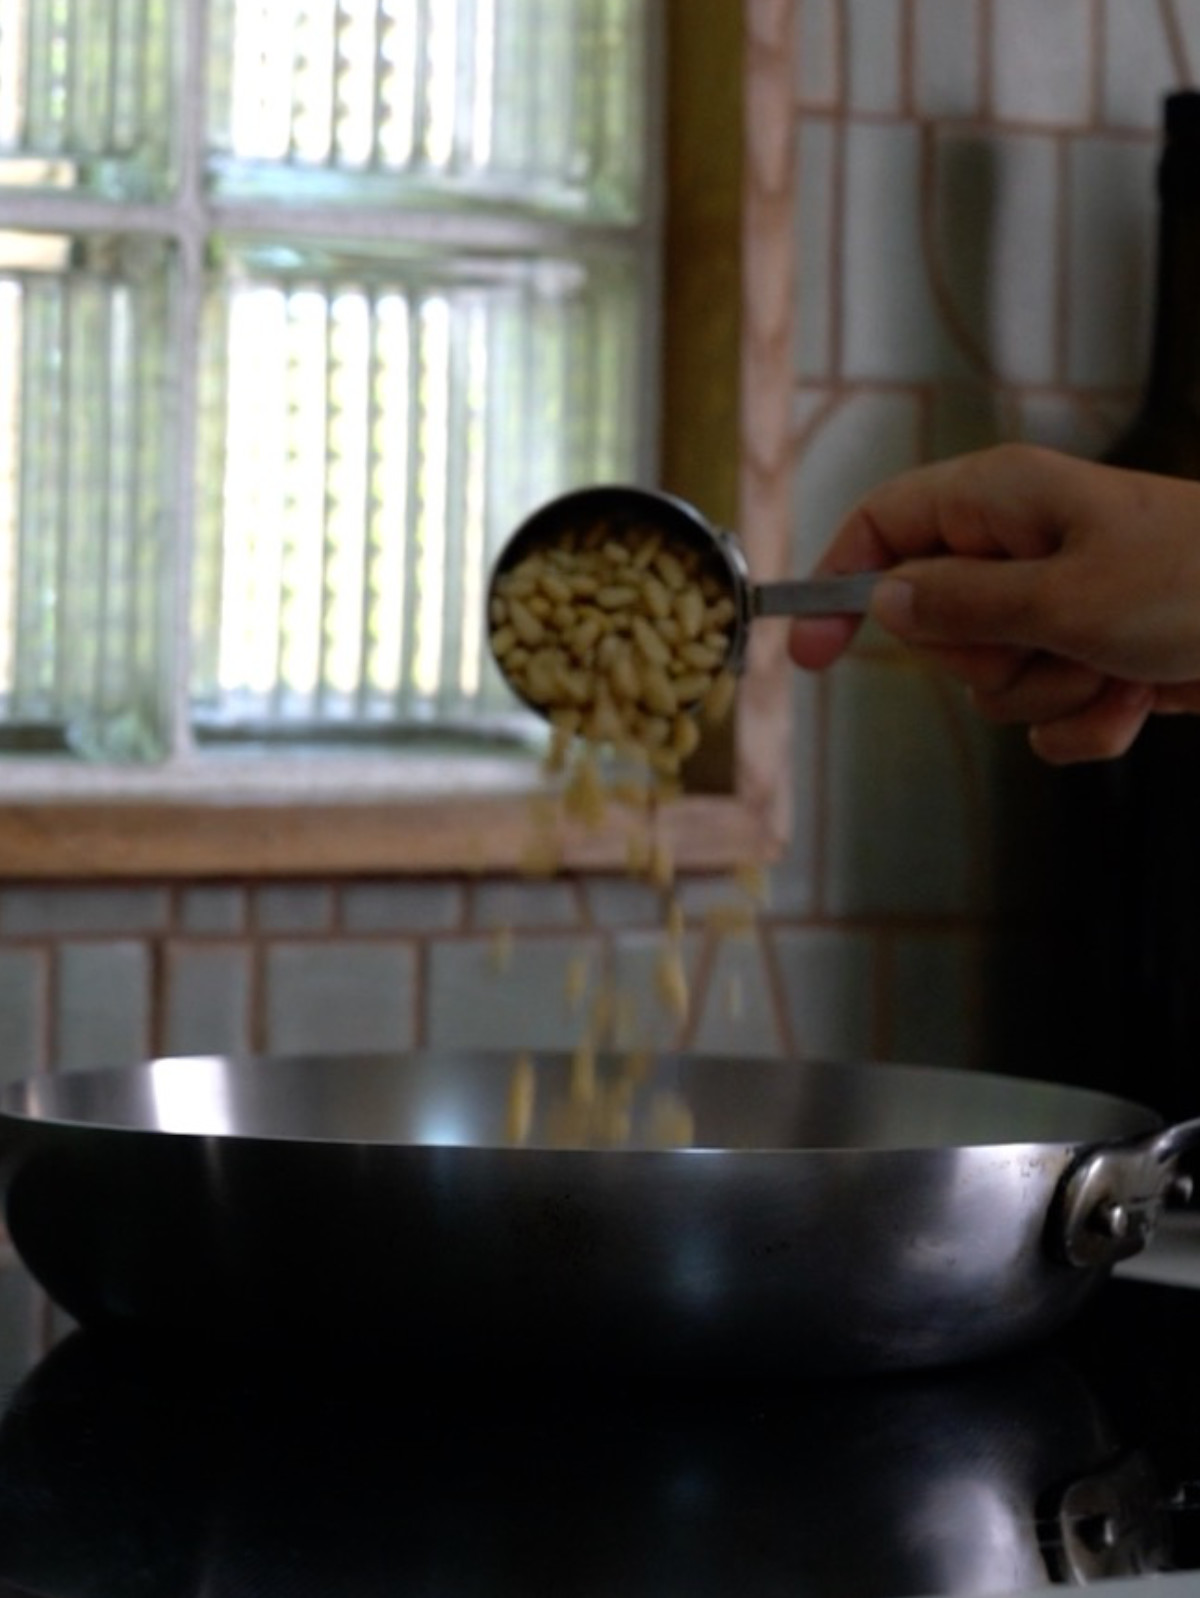 Pouring pin nuts from a metal measuring cup into a metal pan on a cooktop.